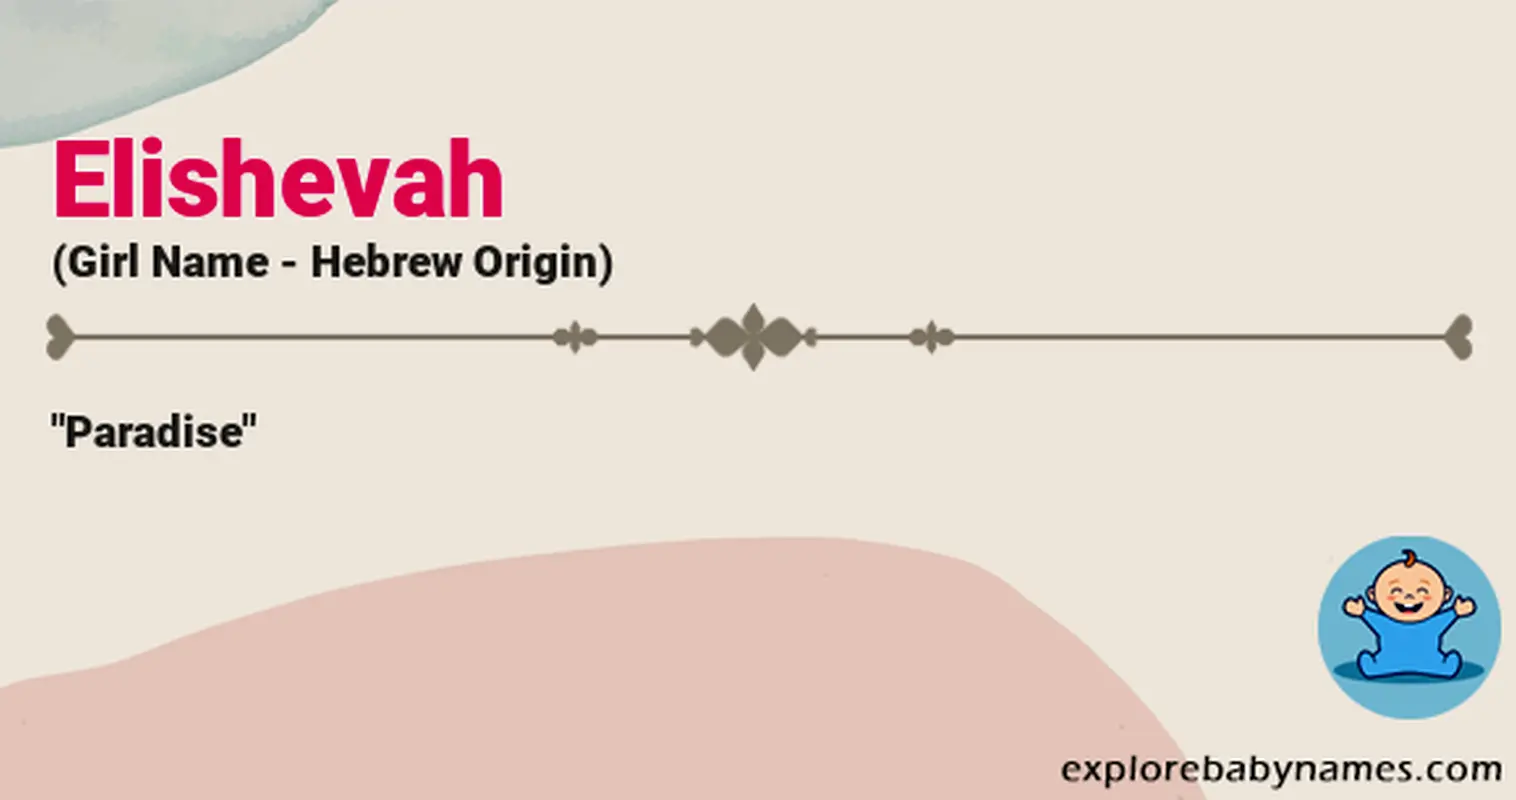 Meaning of Elishevah